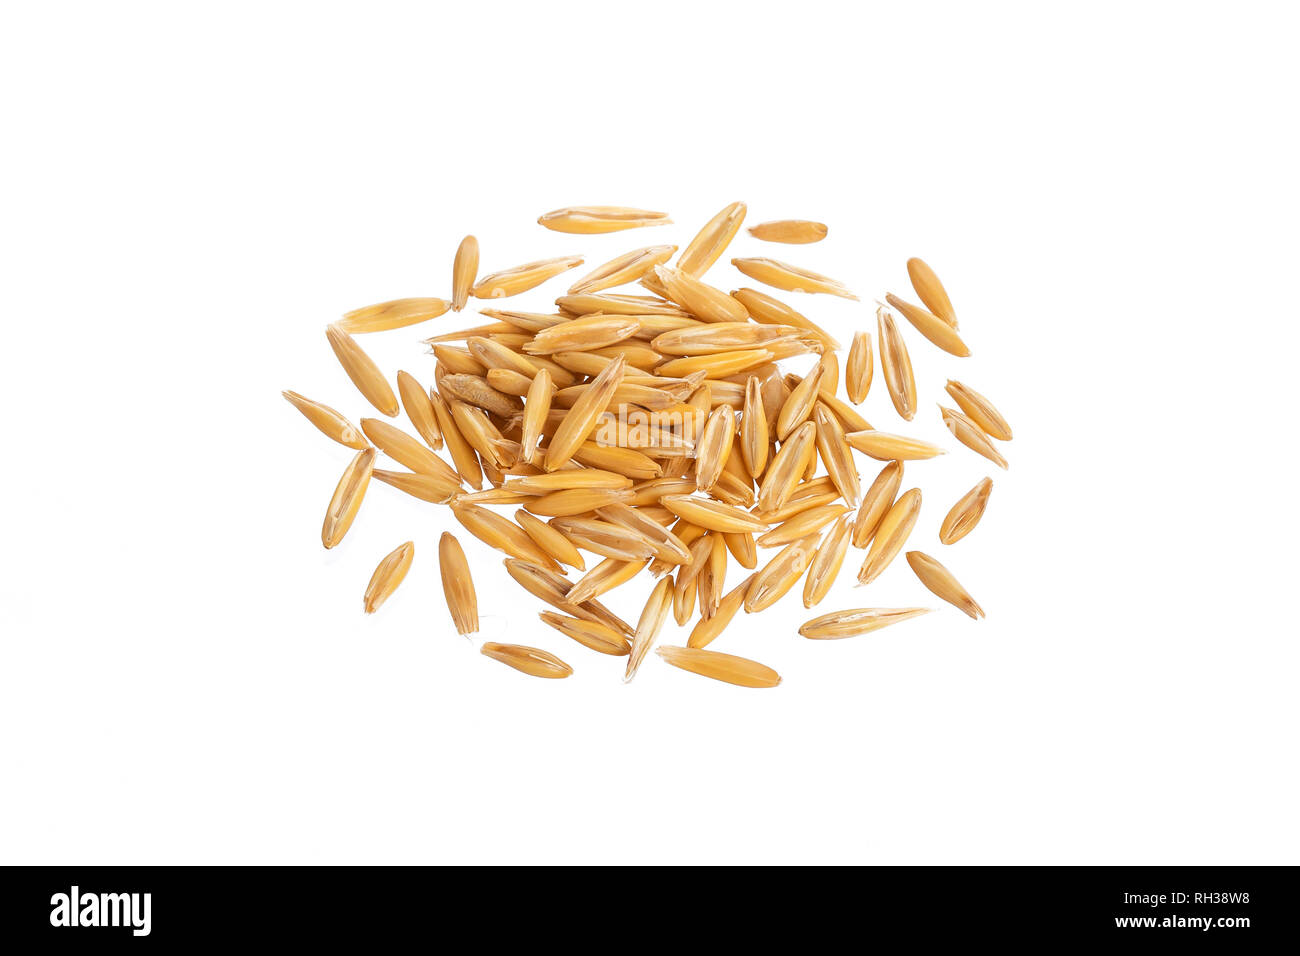 Pile of oat seeds isolated on white background, top view Stock Photo